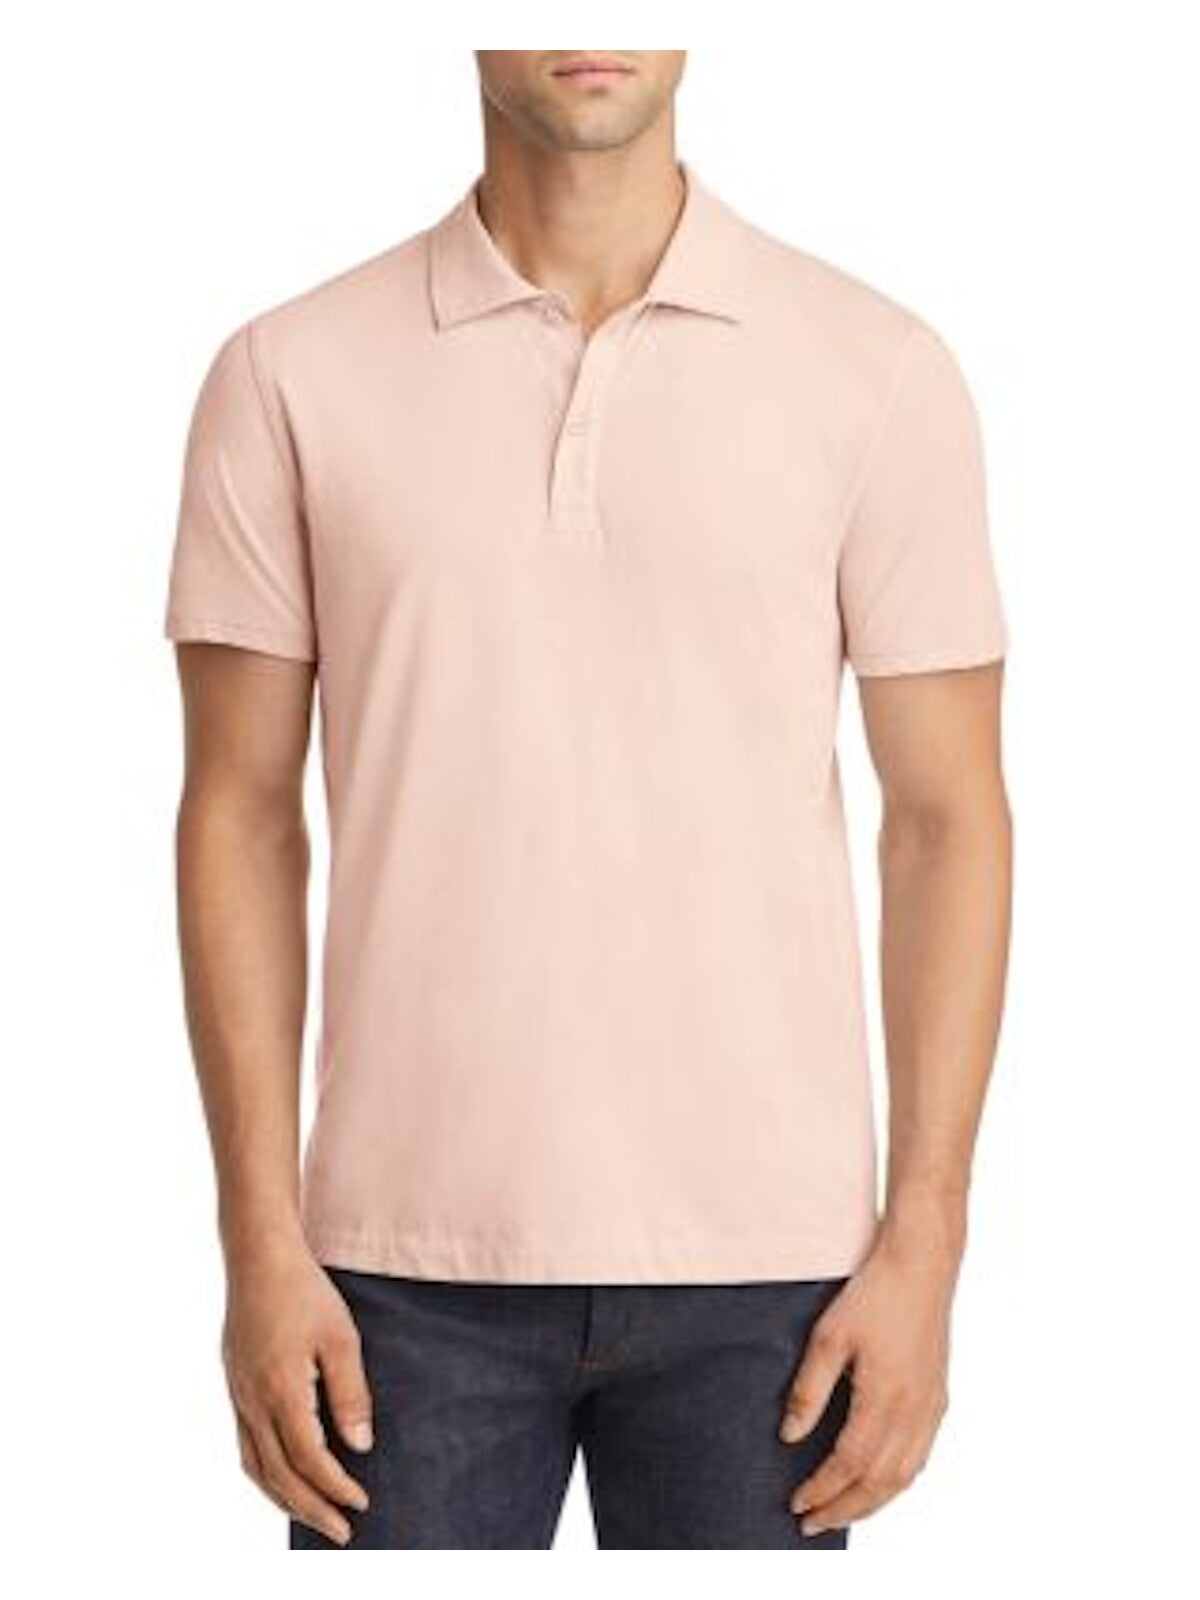 ATM Mens Pink Collared Shirt M